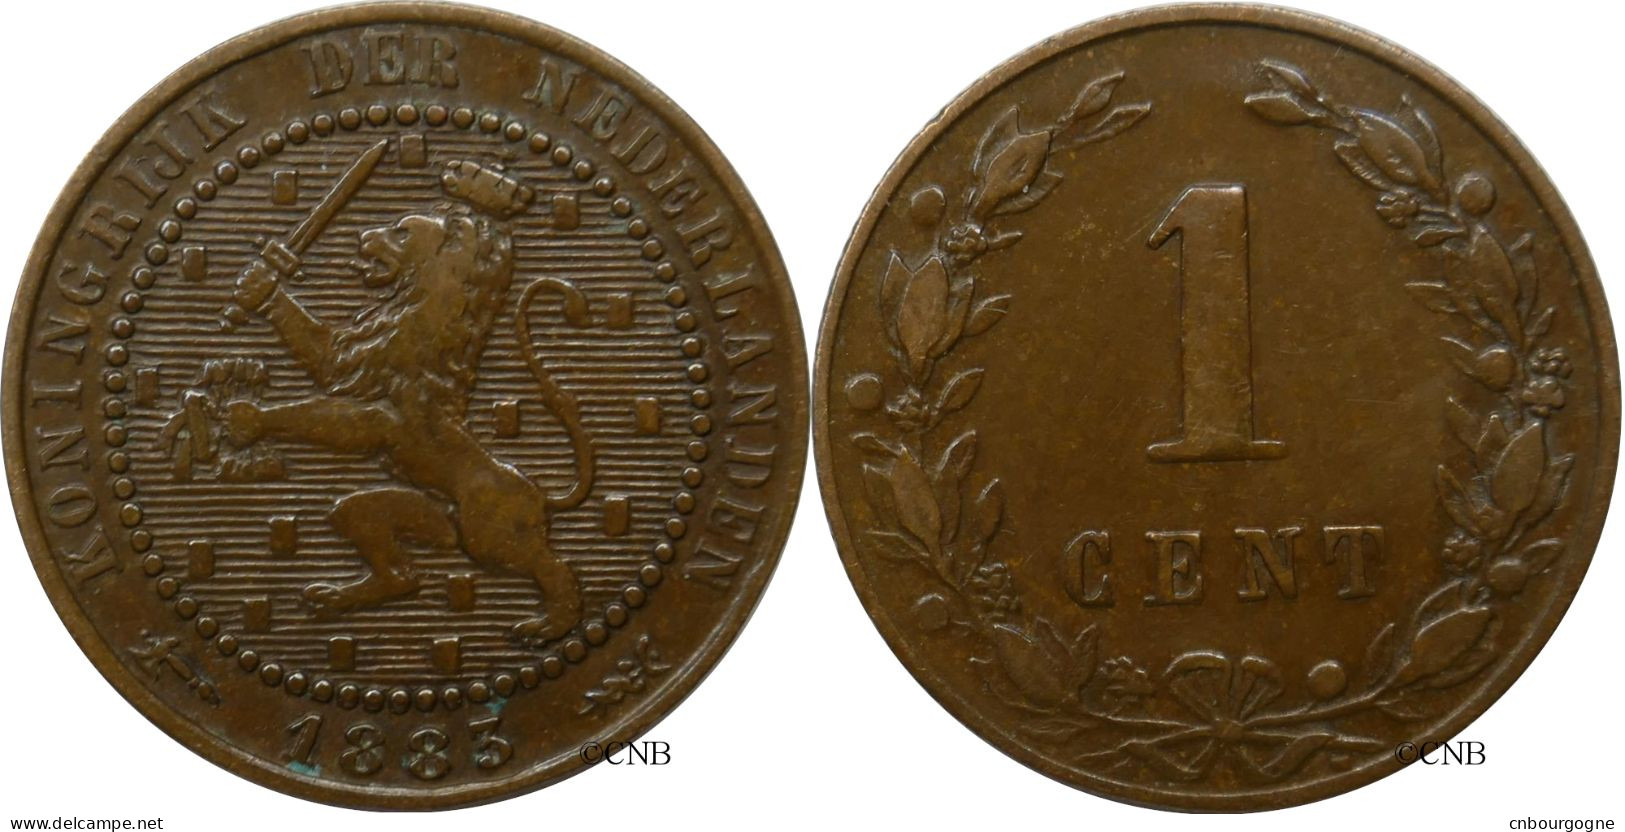 Pays-Bas - Royaume - Guillaume III - 1 Cent 1883 - TTB/XF45 - Mon5232 - 1849-1890: Willem III.